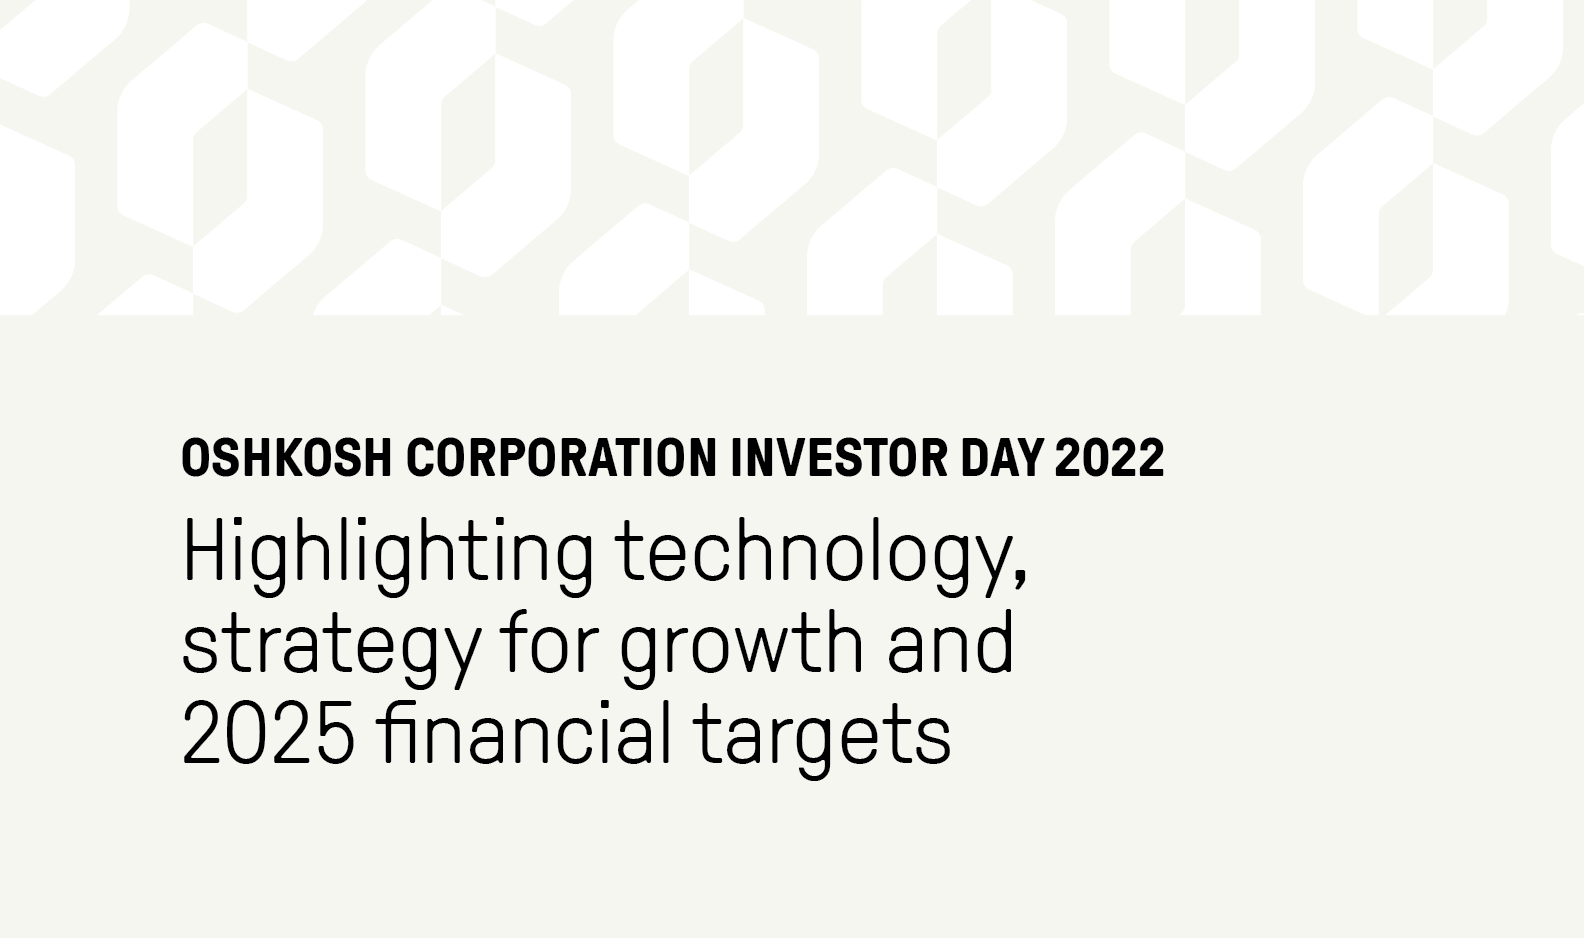 oshkosh corporation investor day 2022 highlighting technology, strategy for growth and 2025 financial targets